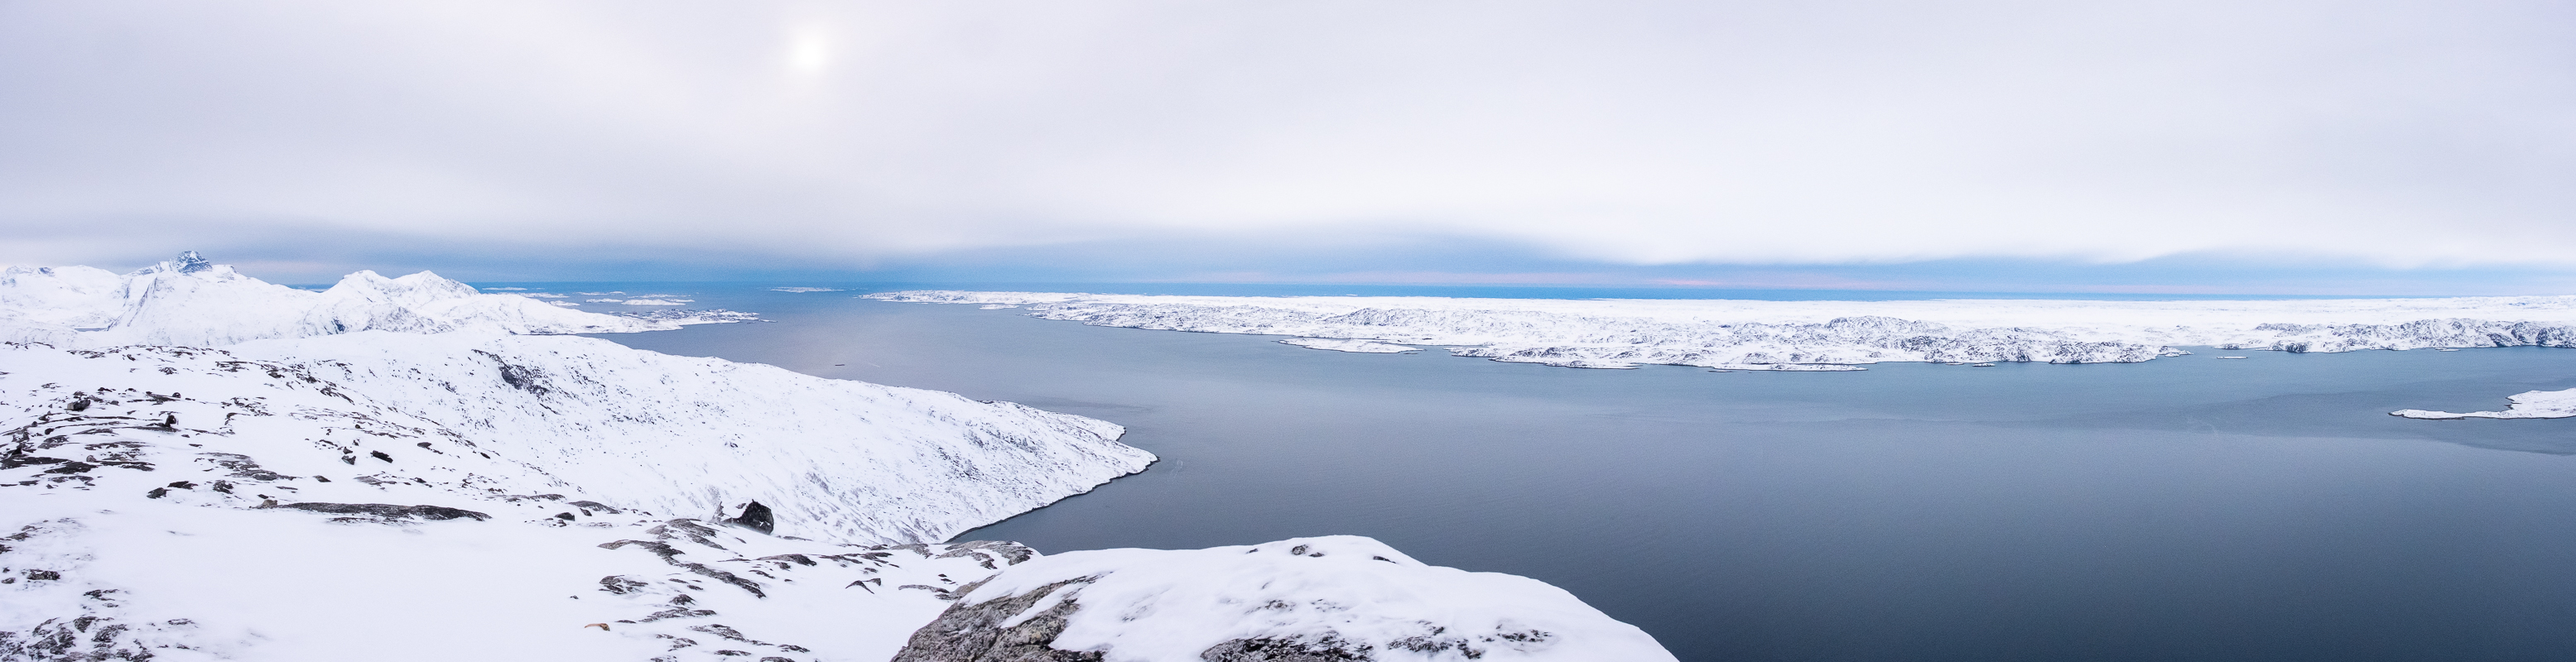 Panorama of the Nuuk Fjord leading down towards Nuuk on the helicopter summit flight, Greenland